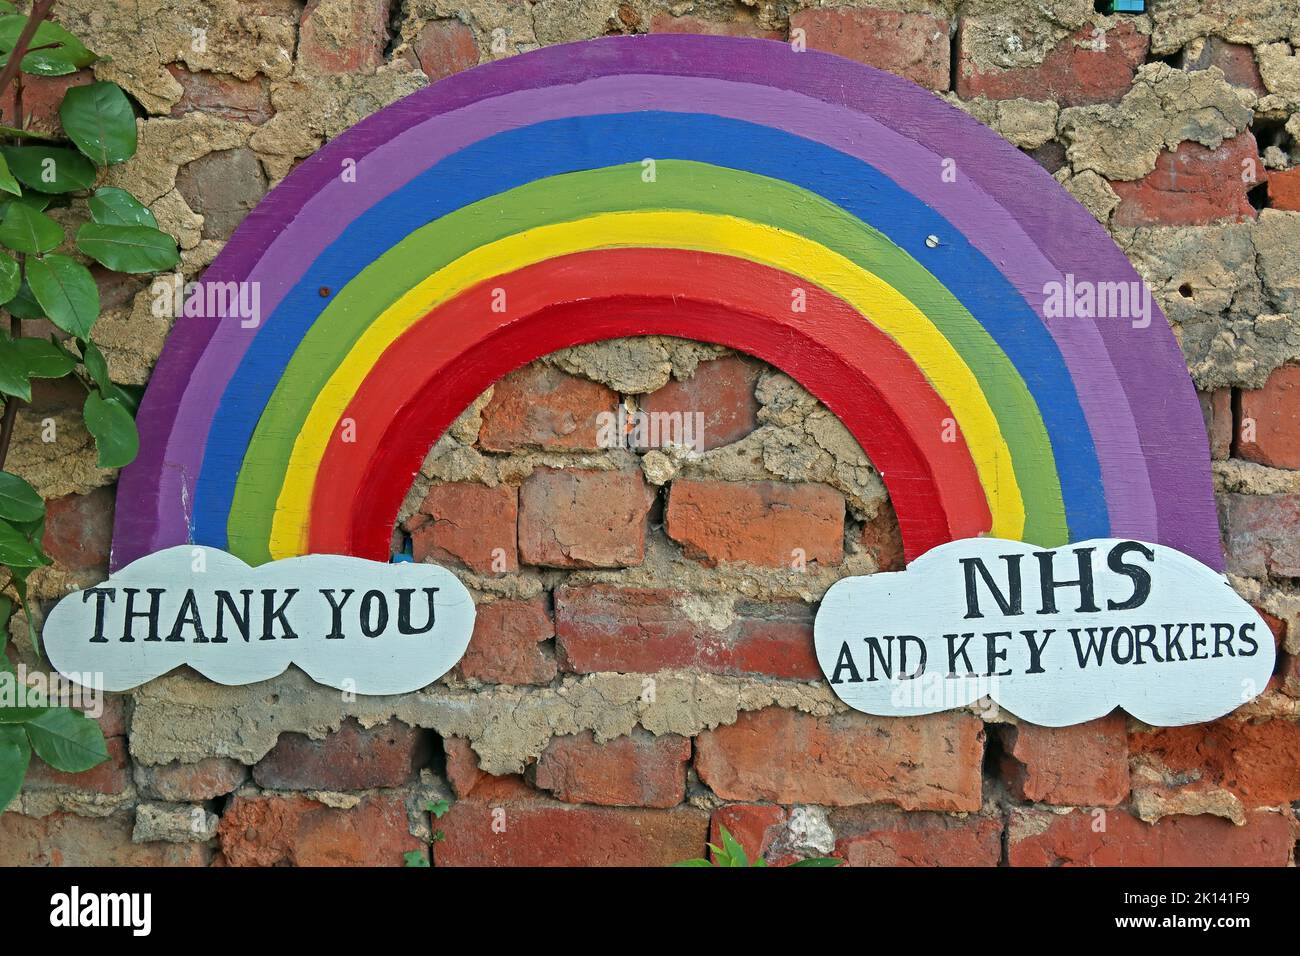 Rainbow on a wall in Runcorn Old Town, Thank You, NHS and Key Workers, clapped but not offered reasonable pay rises, Cheshire, England, UK Stock Photo